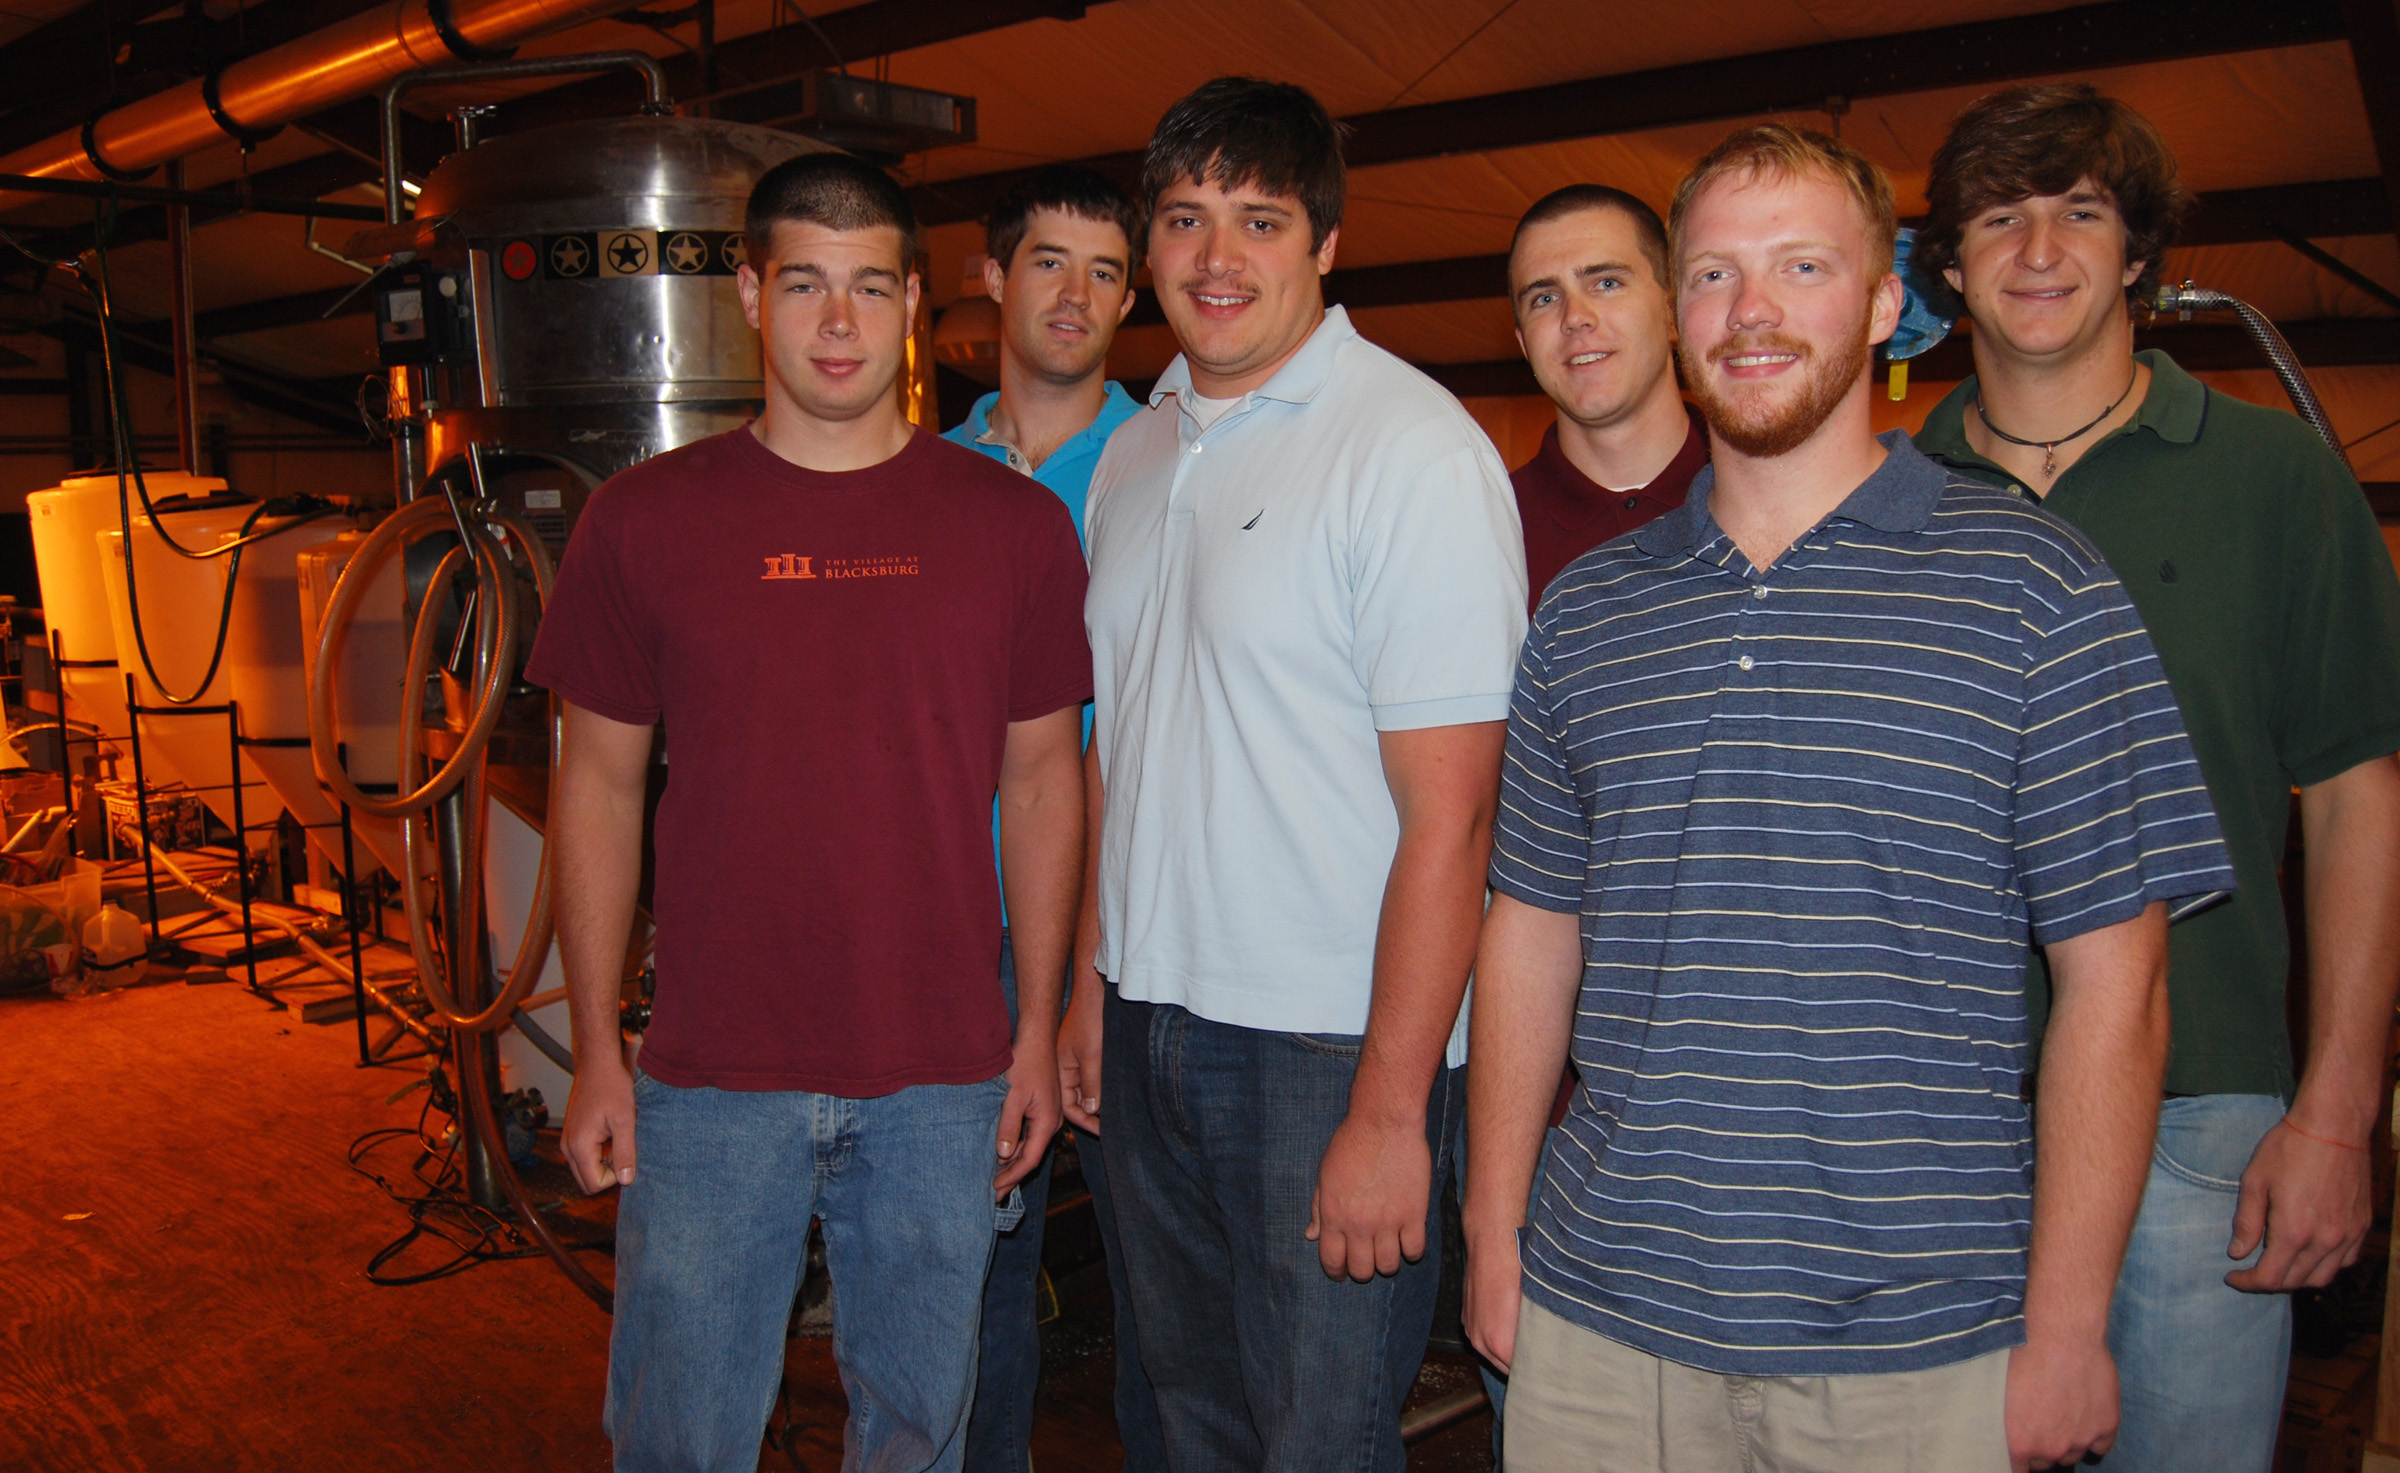 The Virginia Tech Bio-Fuels senior design team spent the better part of two years refining a biodiesel system that converts waste vegetable oil into an environmentally friendly product with high mpg. Left to right are Andrew Yard, Matteo del Ninno, Christopher Chelko, Brian Eggleston, Blake Gordon and Christopher Block. Not pictured is Meredith Herrmann. Behind the students are tanks, agitators, heaters and assorted equipment used to make the fuel.